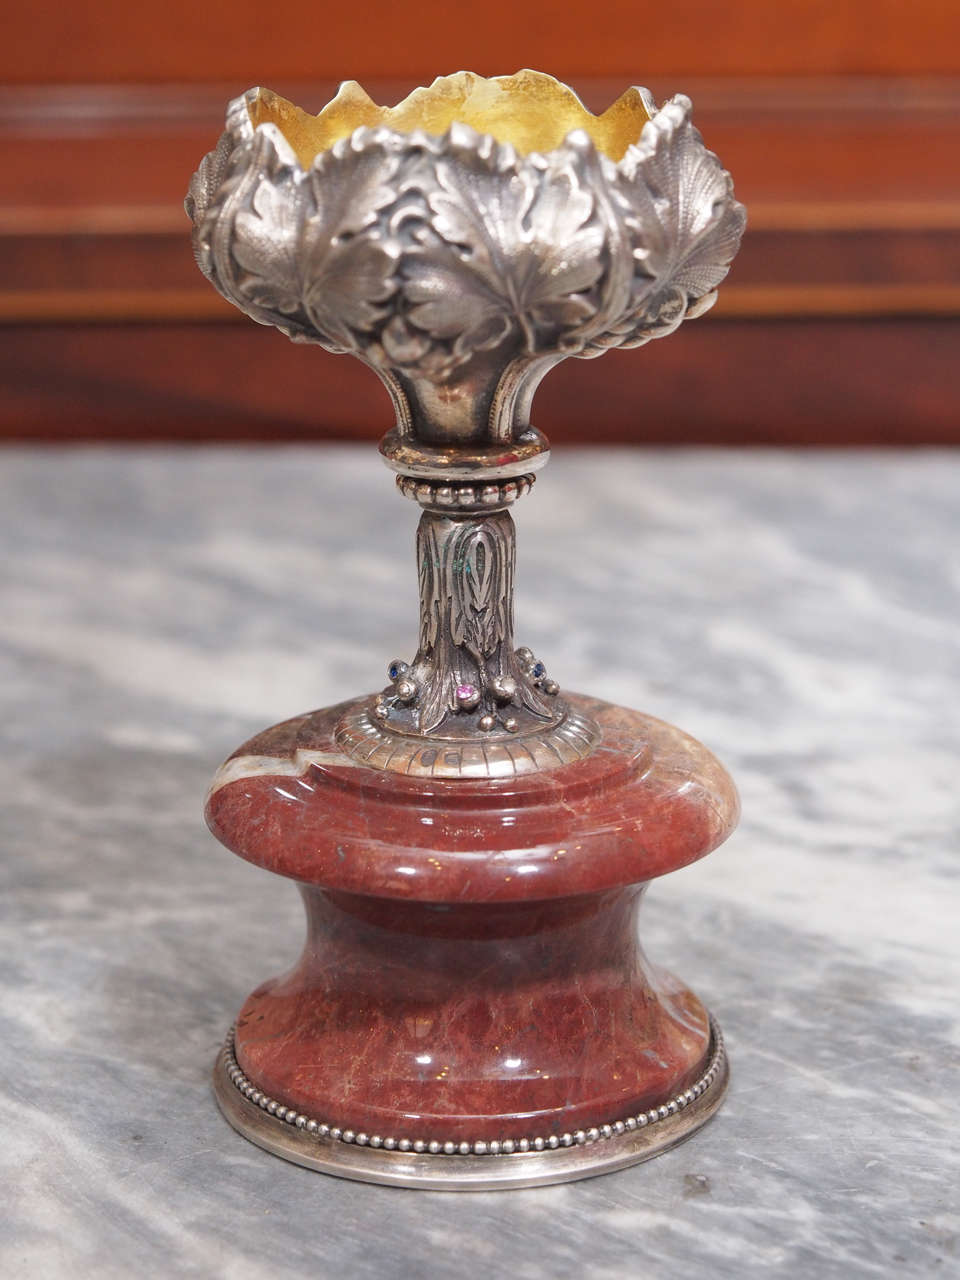 Russian silver and marble vase having figural leaves and berries with foliate design. Mounted on a red marble base. Gold wash interior to silver. Holds 88 silver purity and town marks with Andrei Andreev Aleksandrov Workmaster marks.